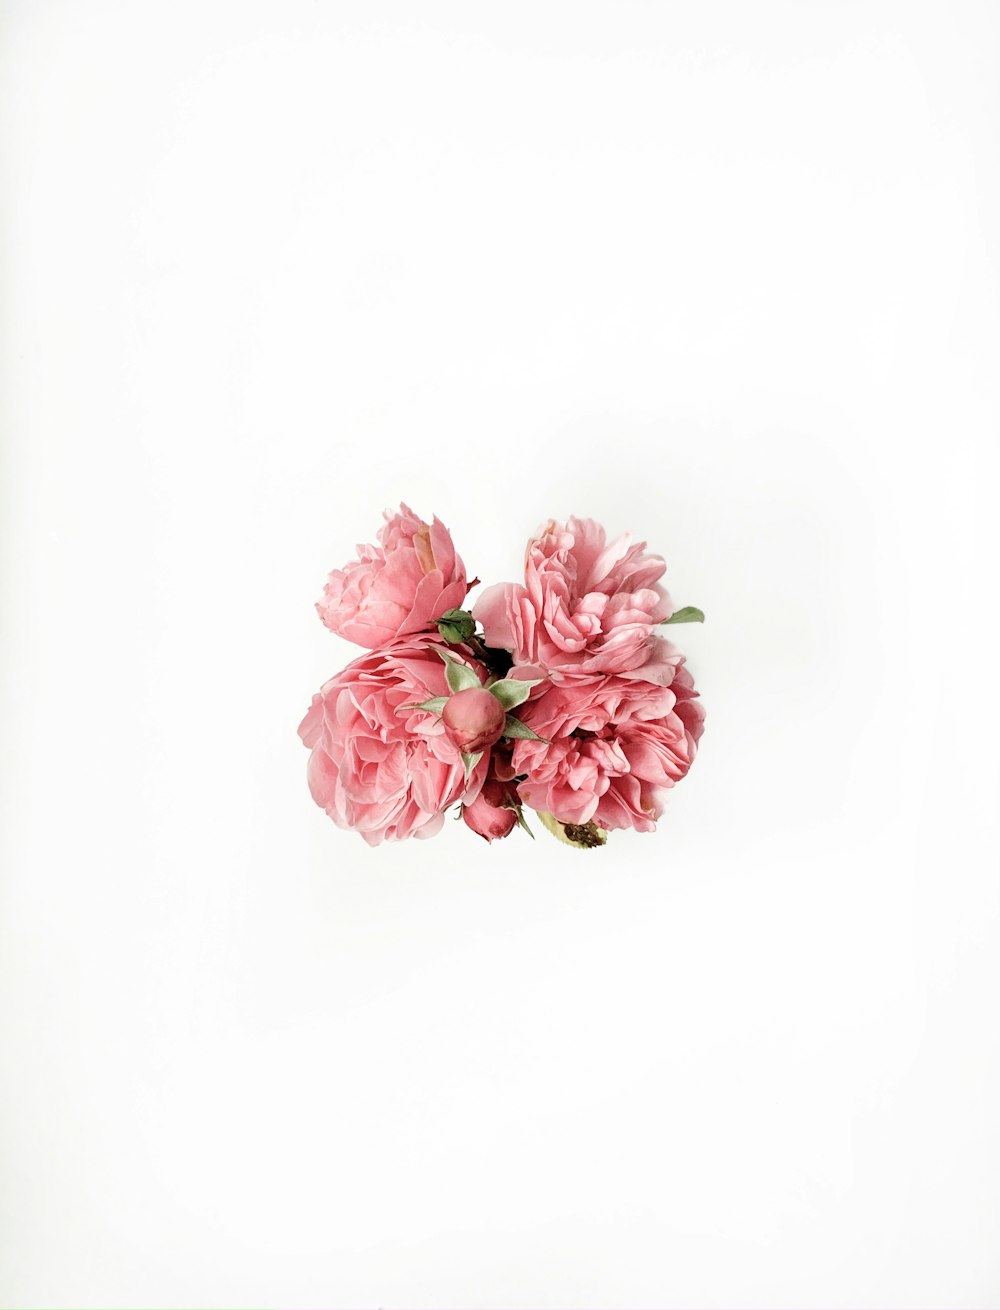 pink and white flowers on white background